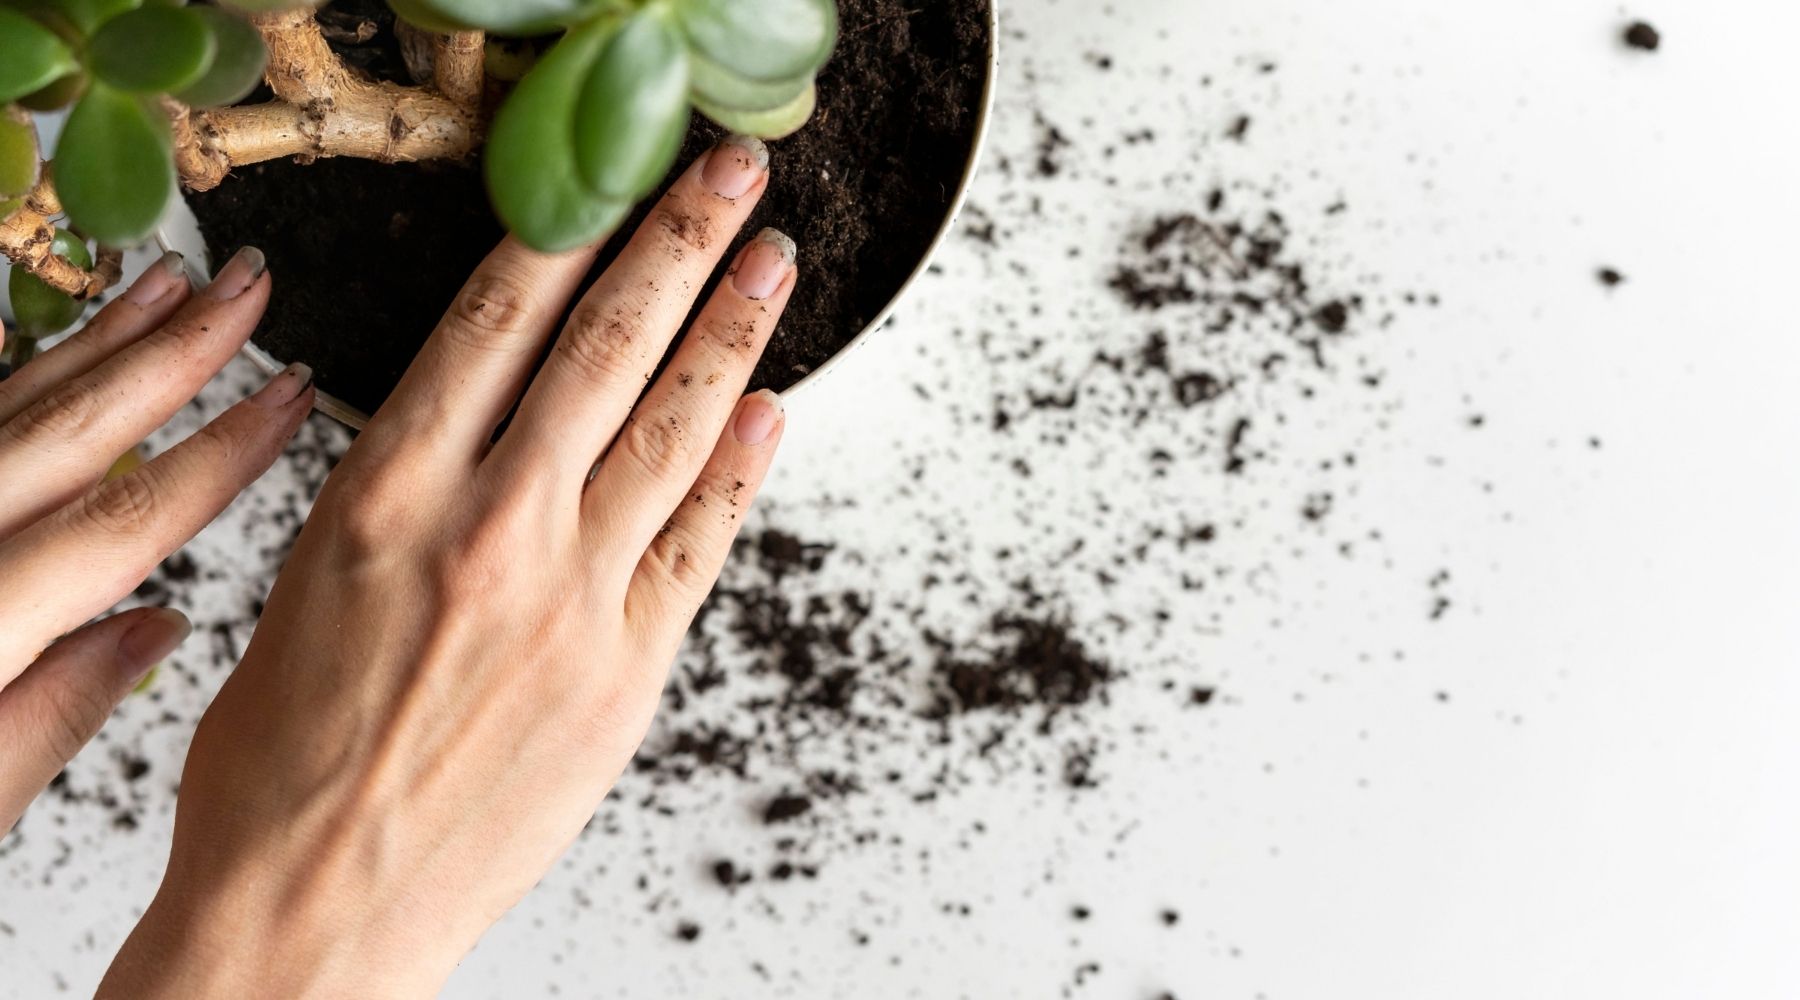 Indoor Plant Care: 9 Common Houseplant Mistakes to Avoid - Issues with soil